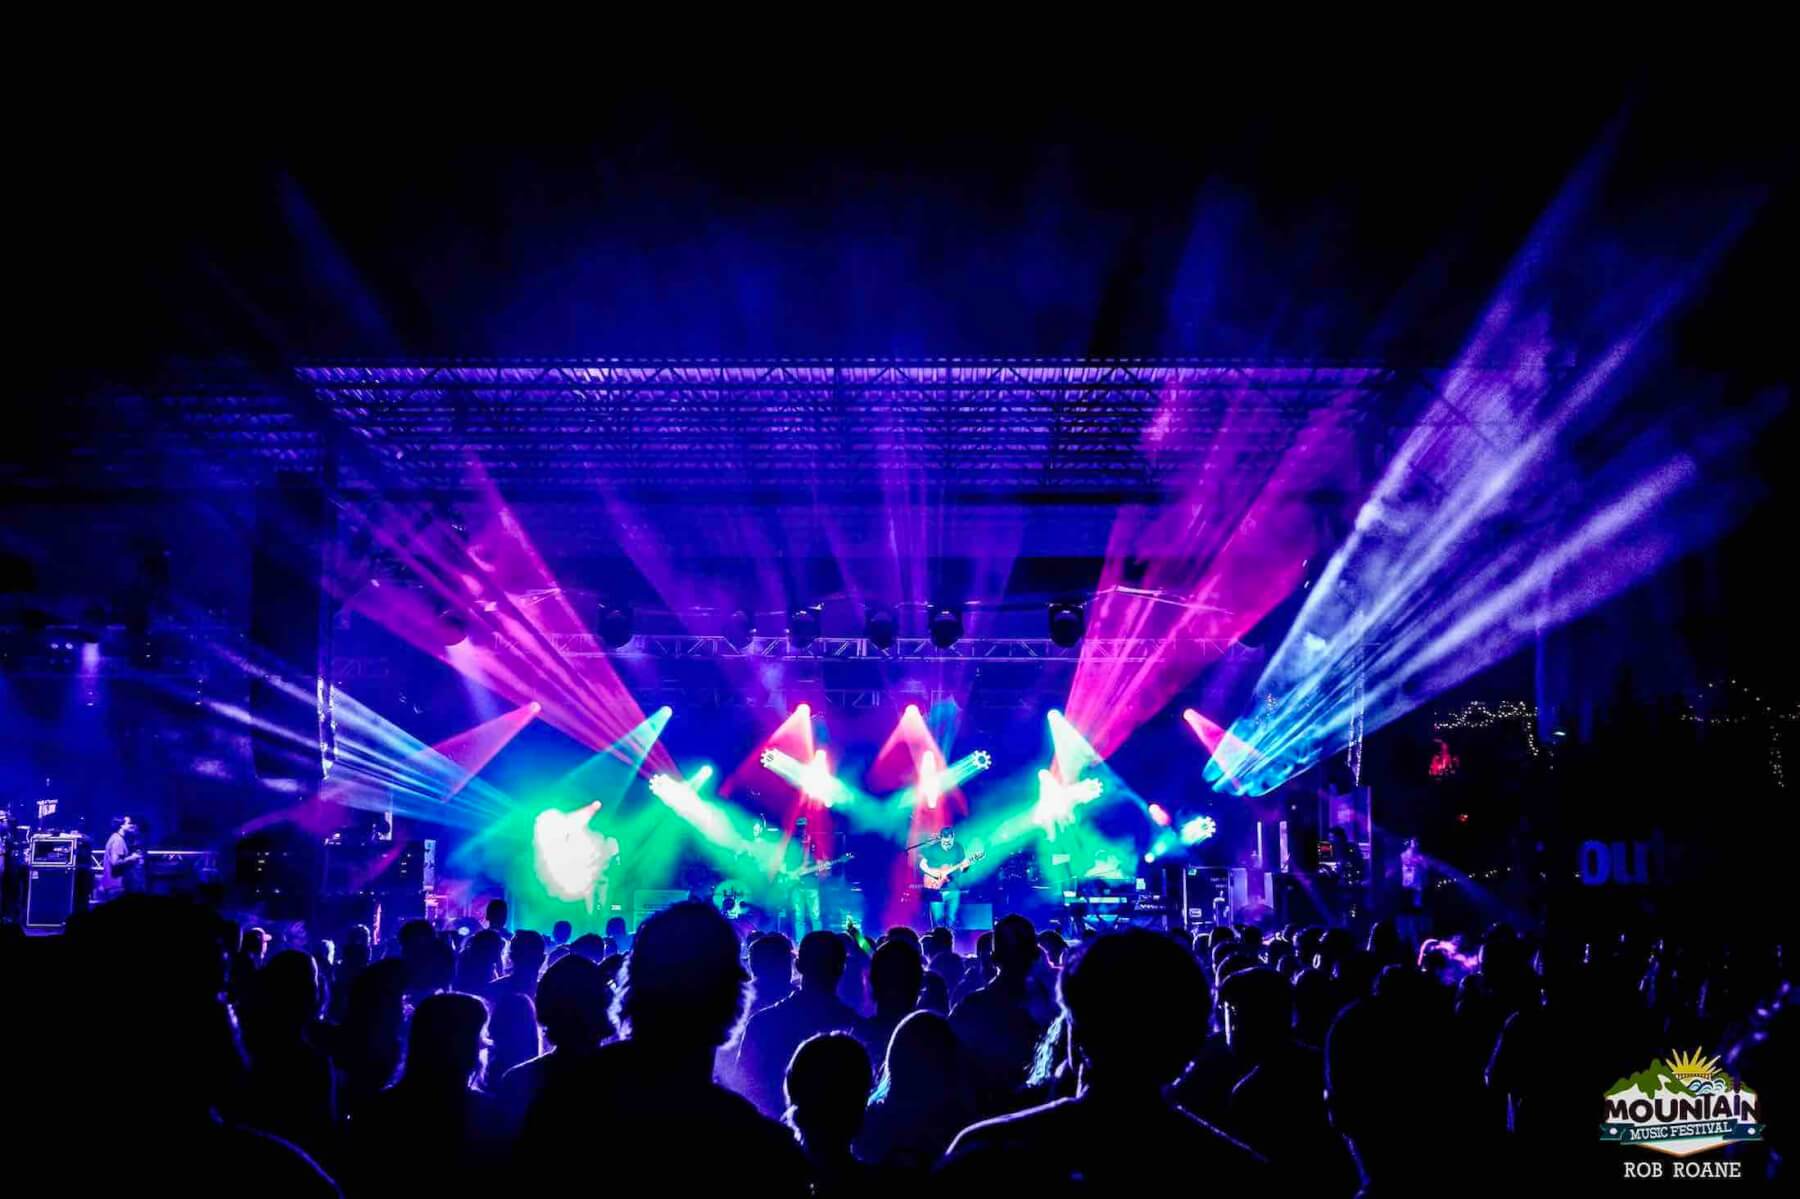 Umprheys mcgee at mountain music festival 2018 in the new river gorge 